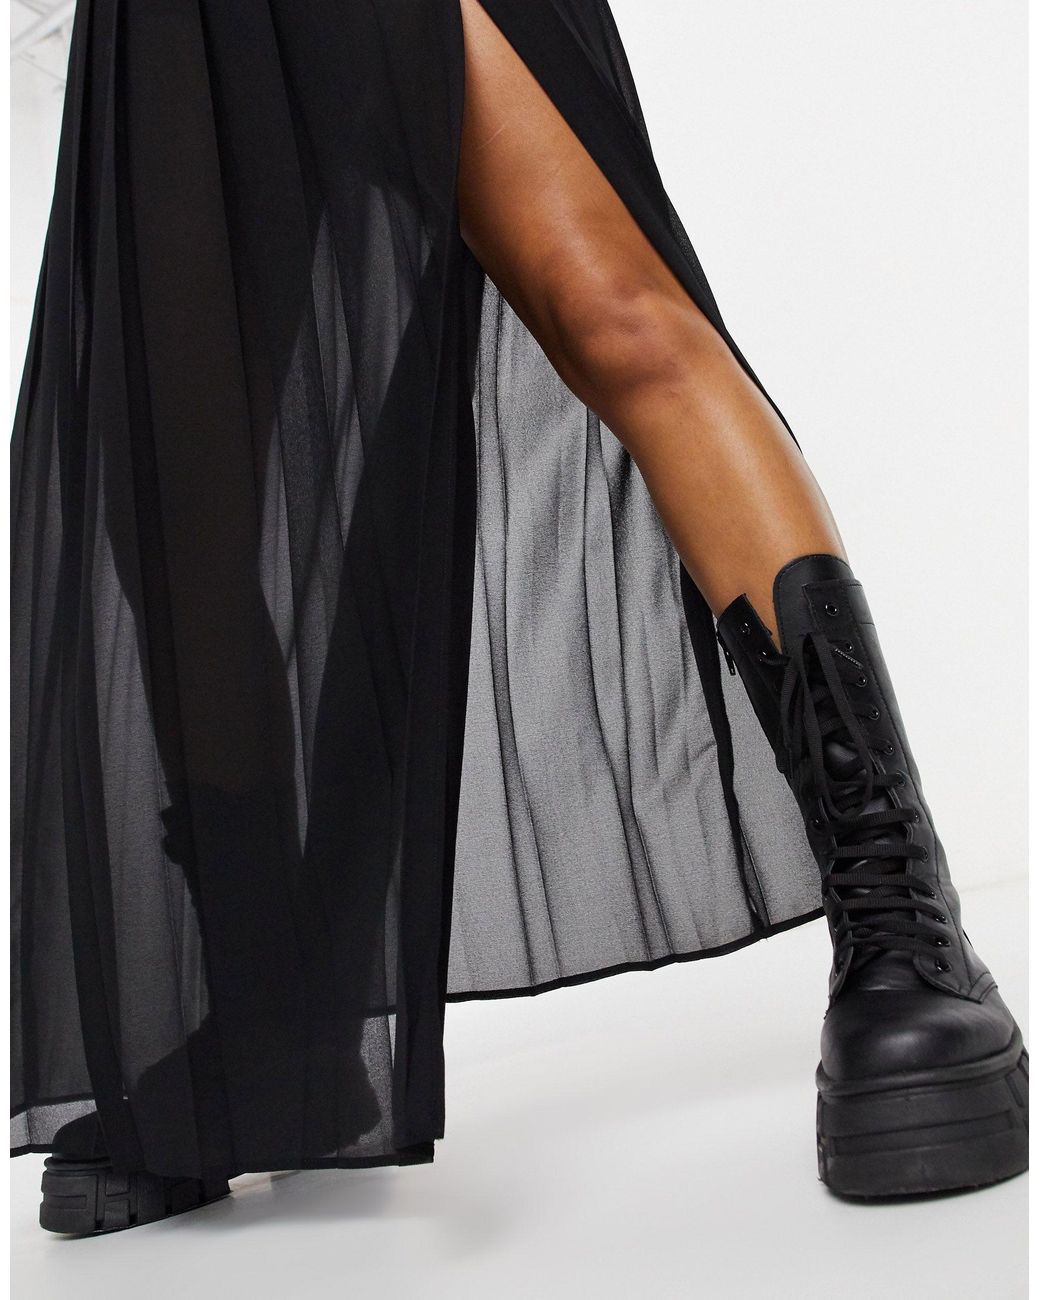 Collusion Sheer Pleated Maxi Skirt With Slit in Black | Lyst